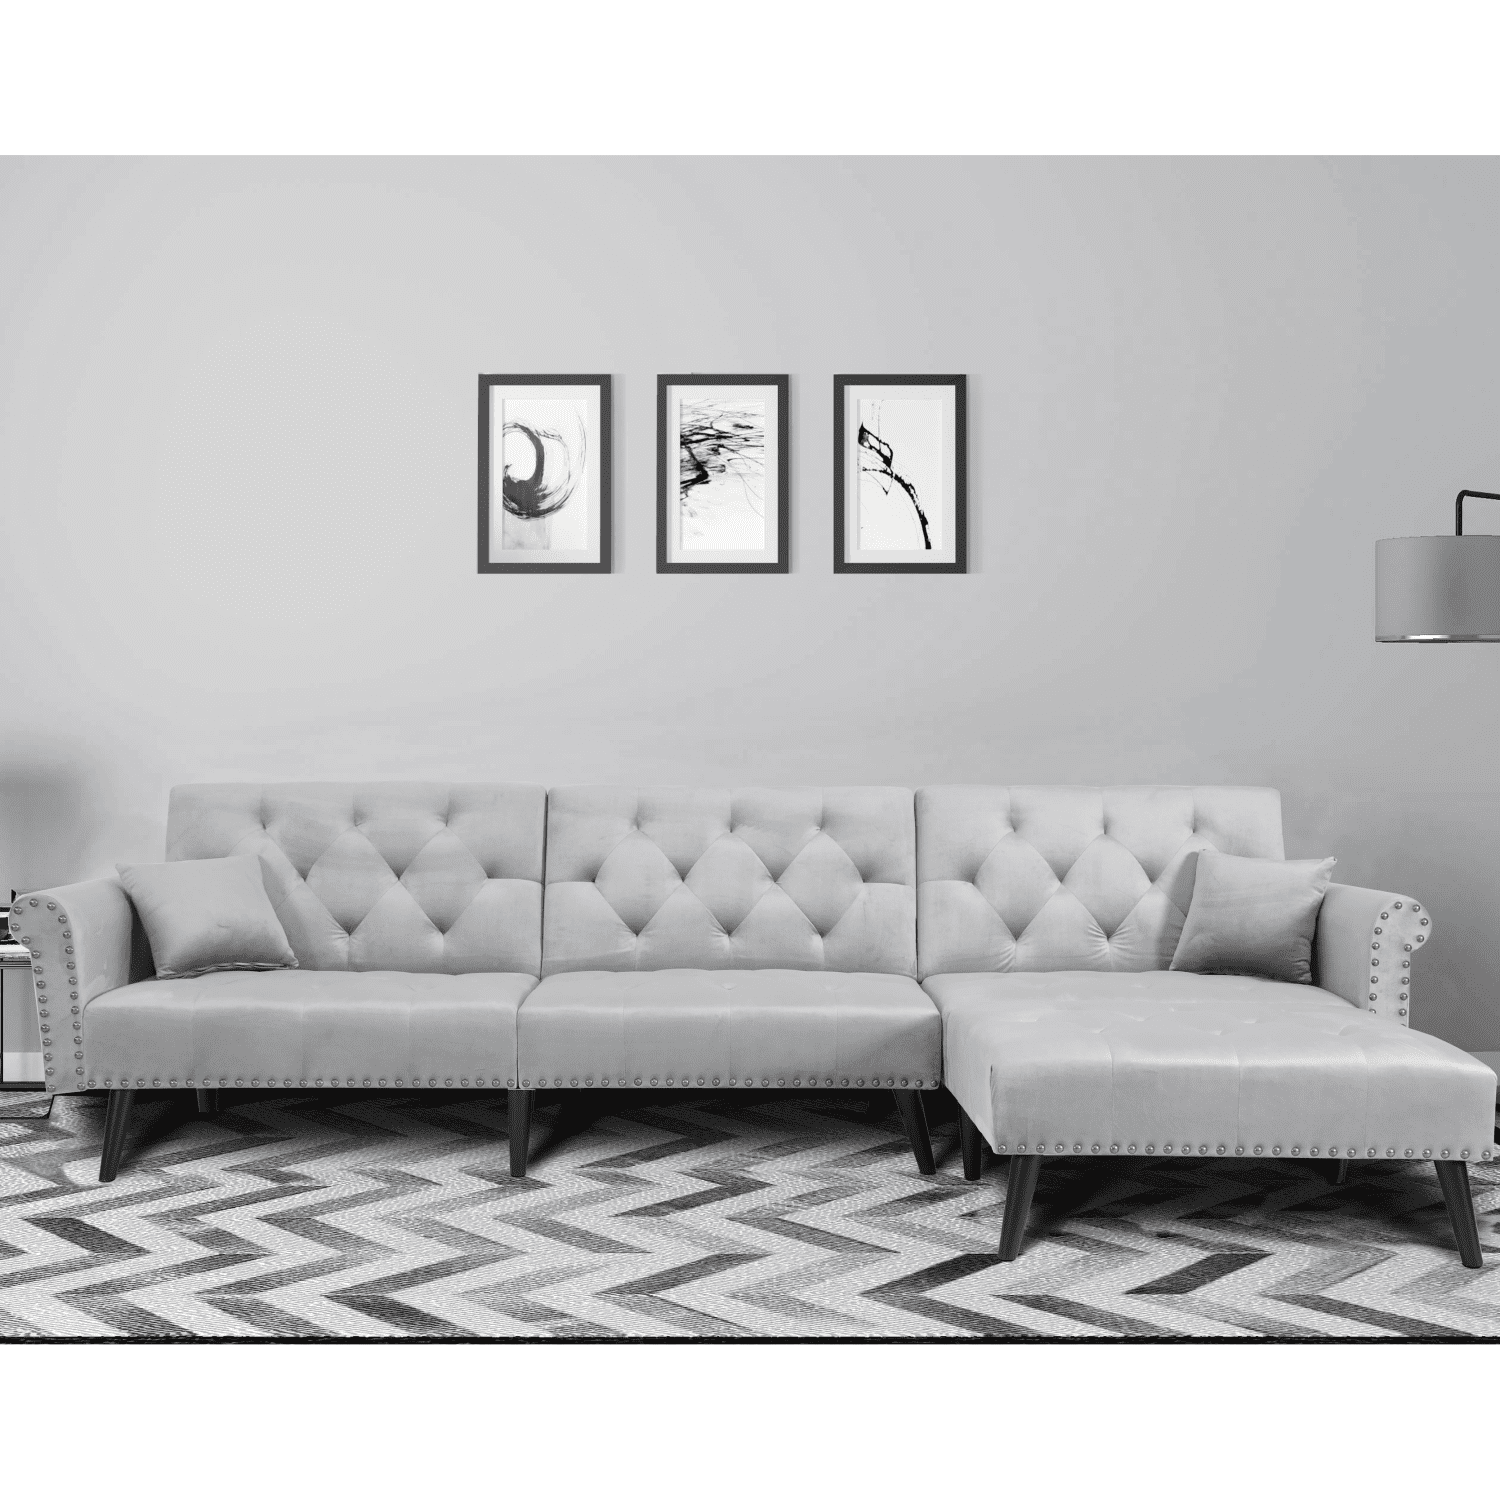 Lowestbest Sectional Couch with Chaise Lounge, L-Shaped Reversible